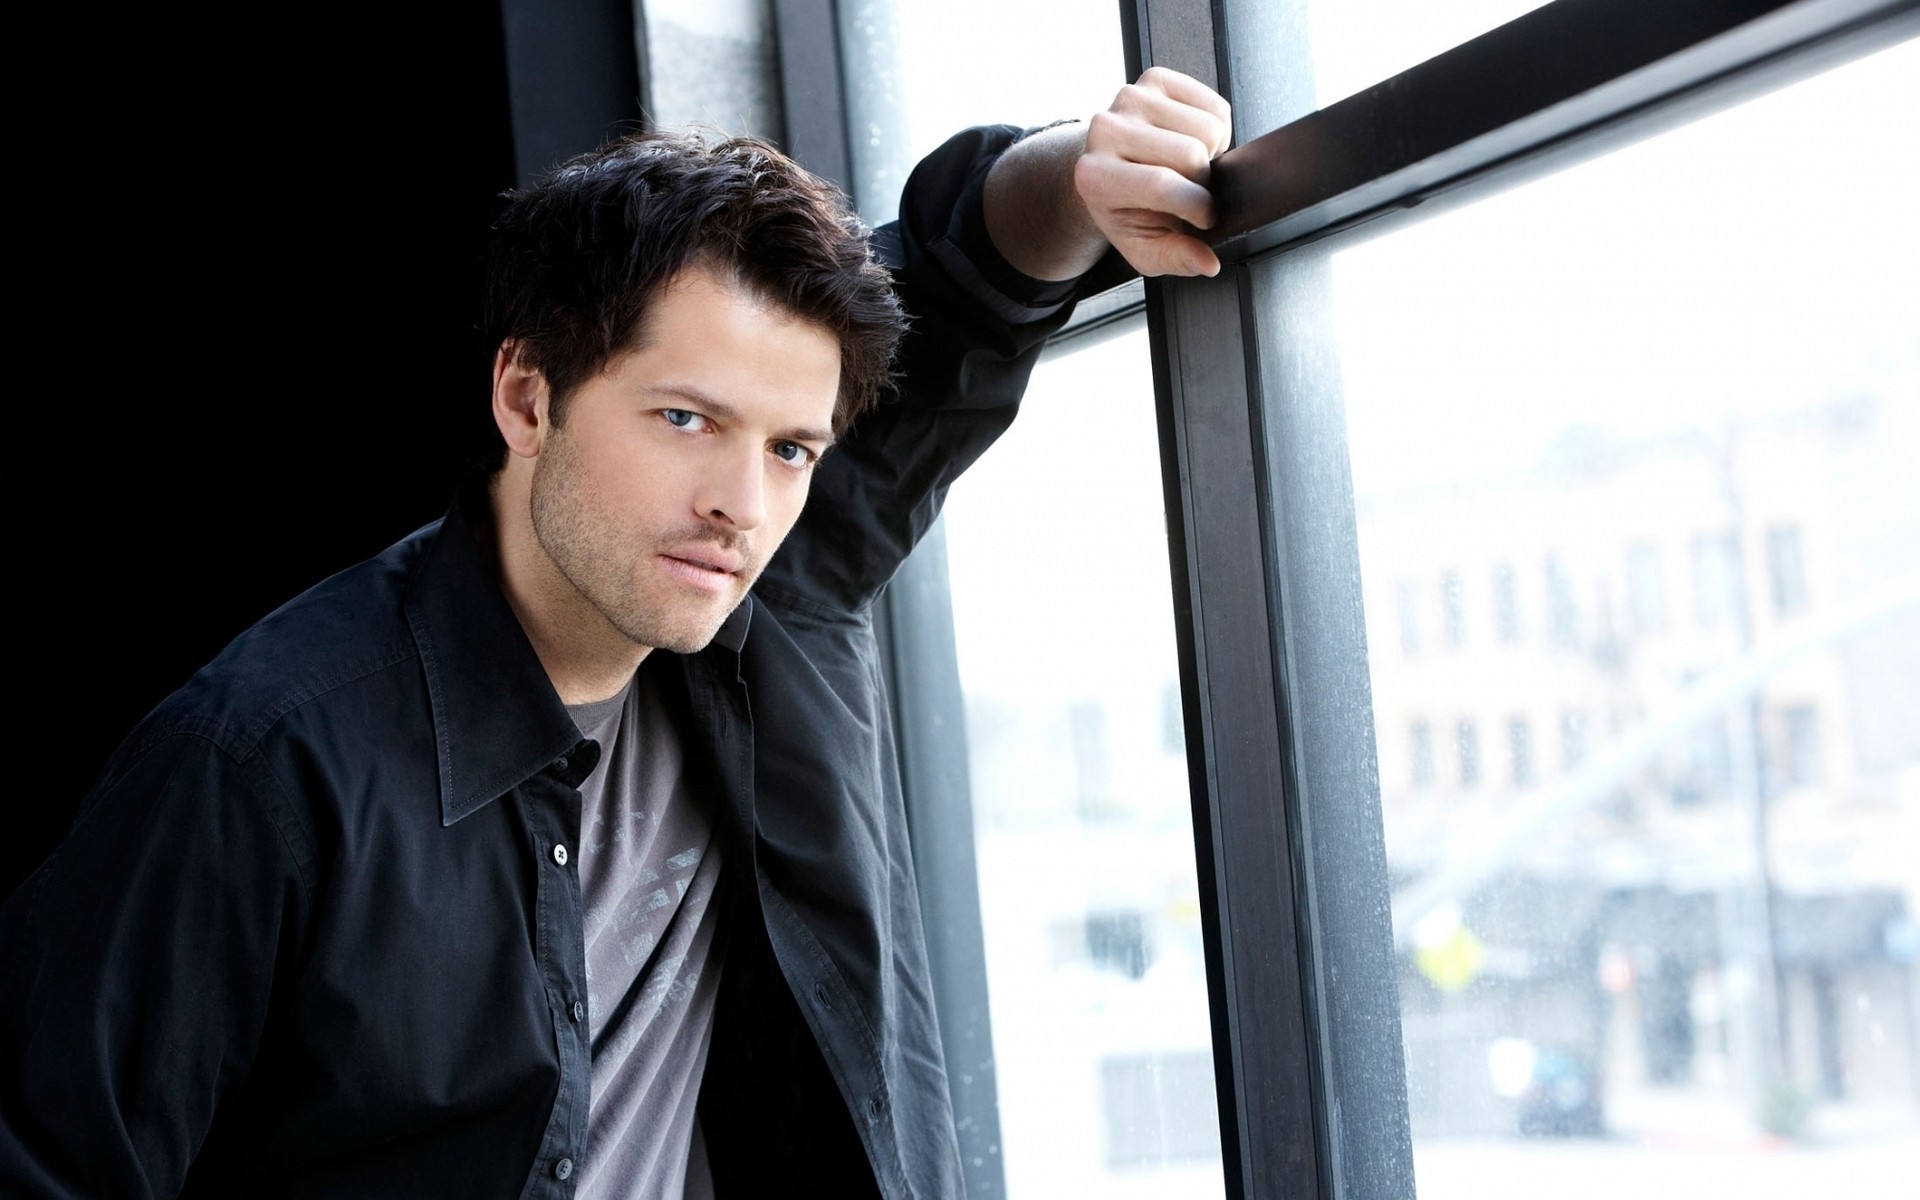 men man indoors business looking connection adult window fine-looking contemporary castiel supernatural actor male